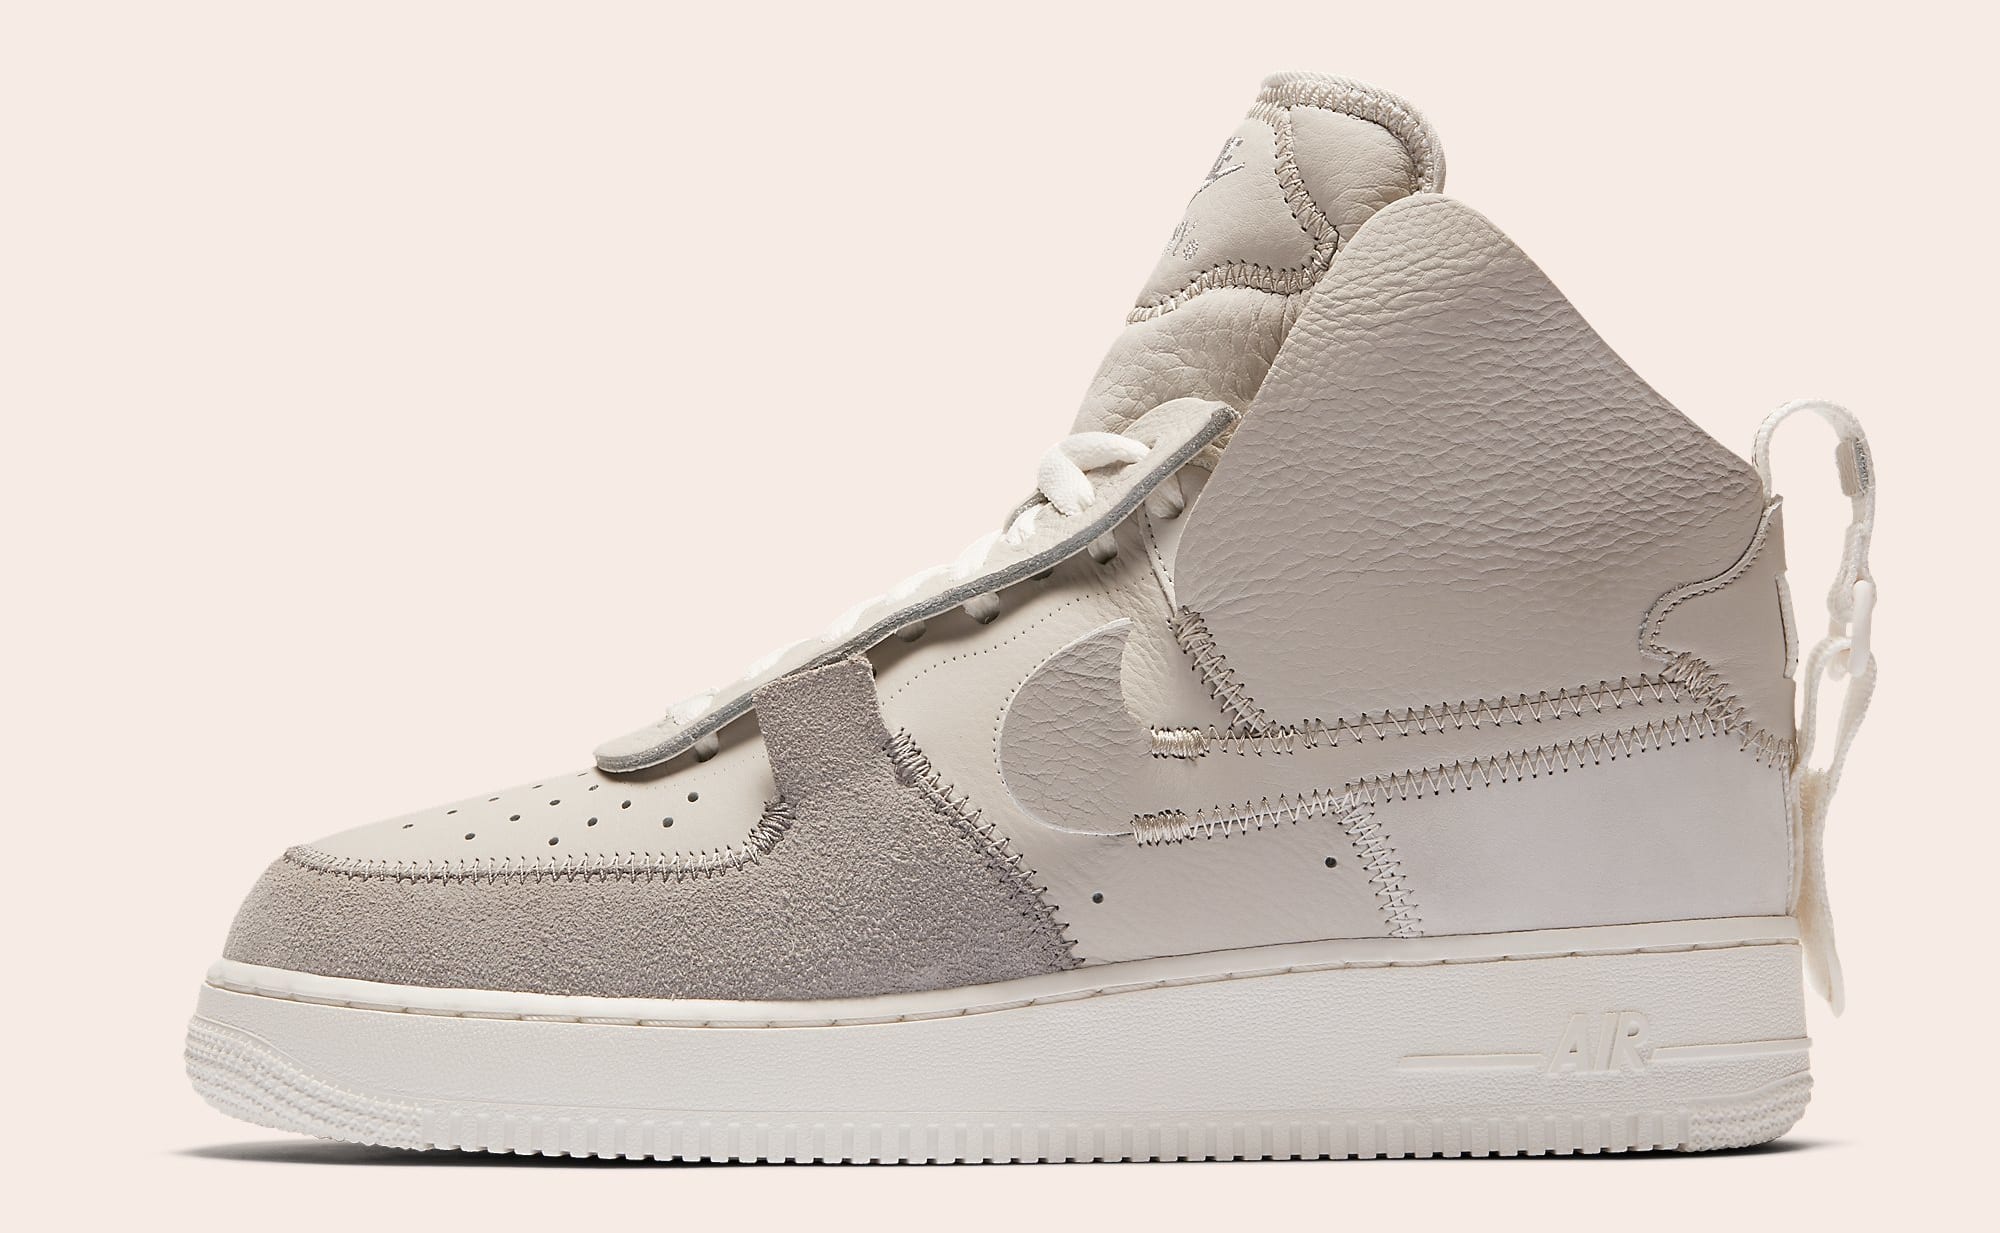 PSNY x Nike Air Force 1 AO9292-001 Lateral